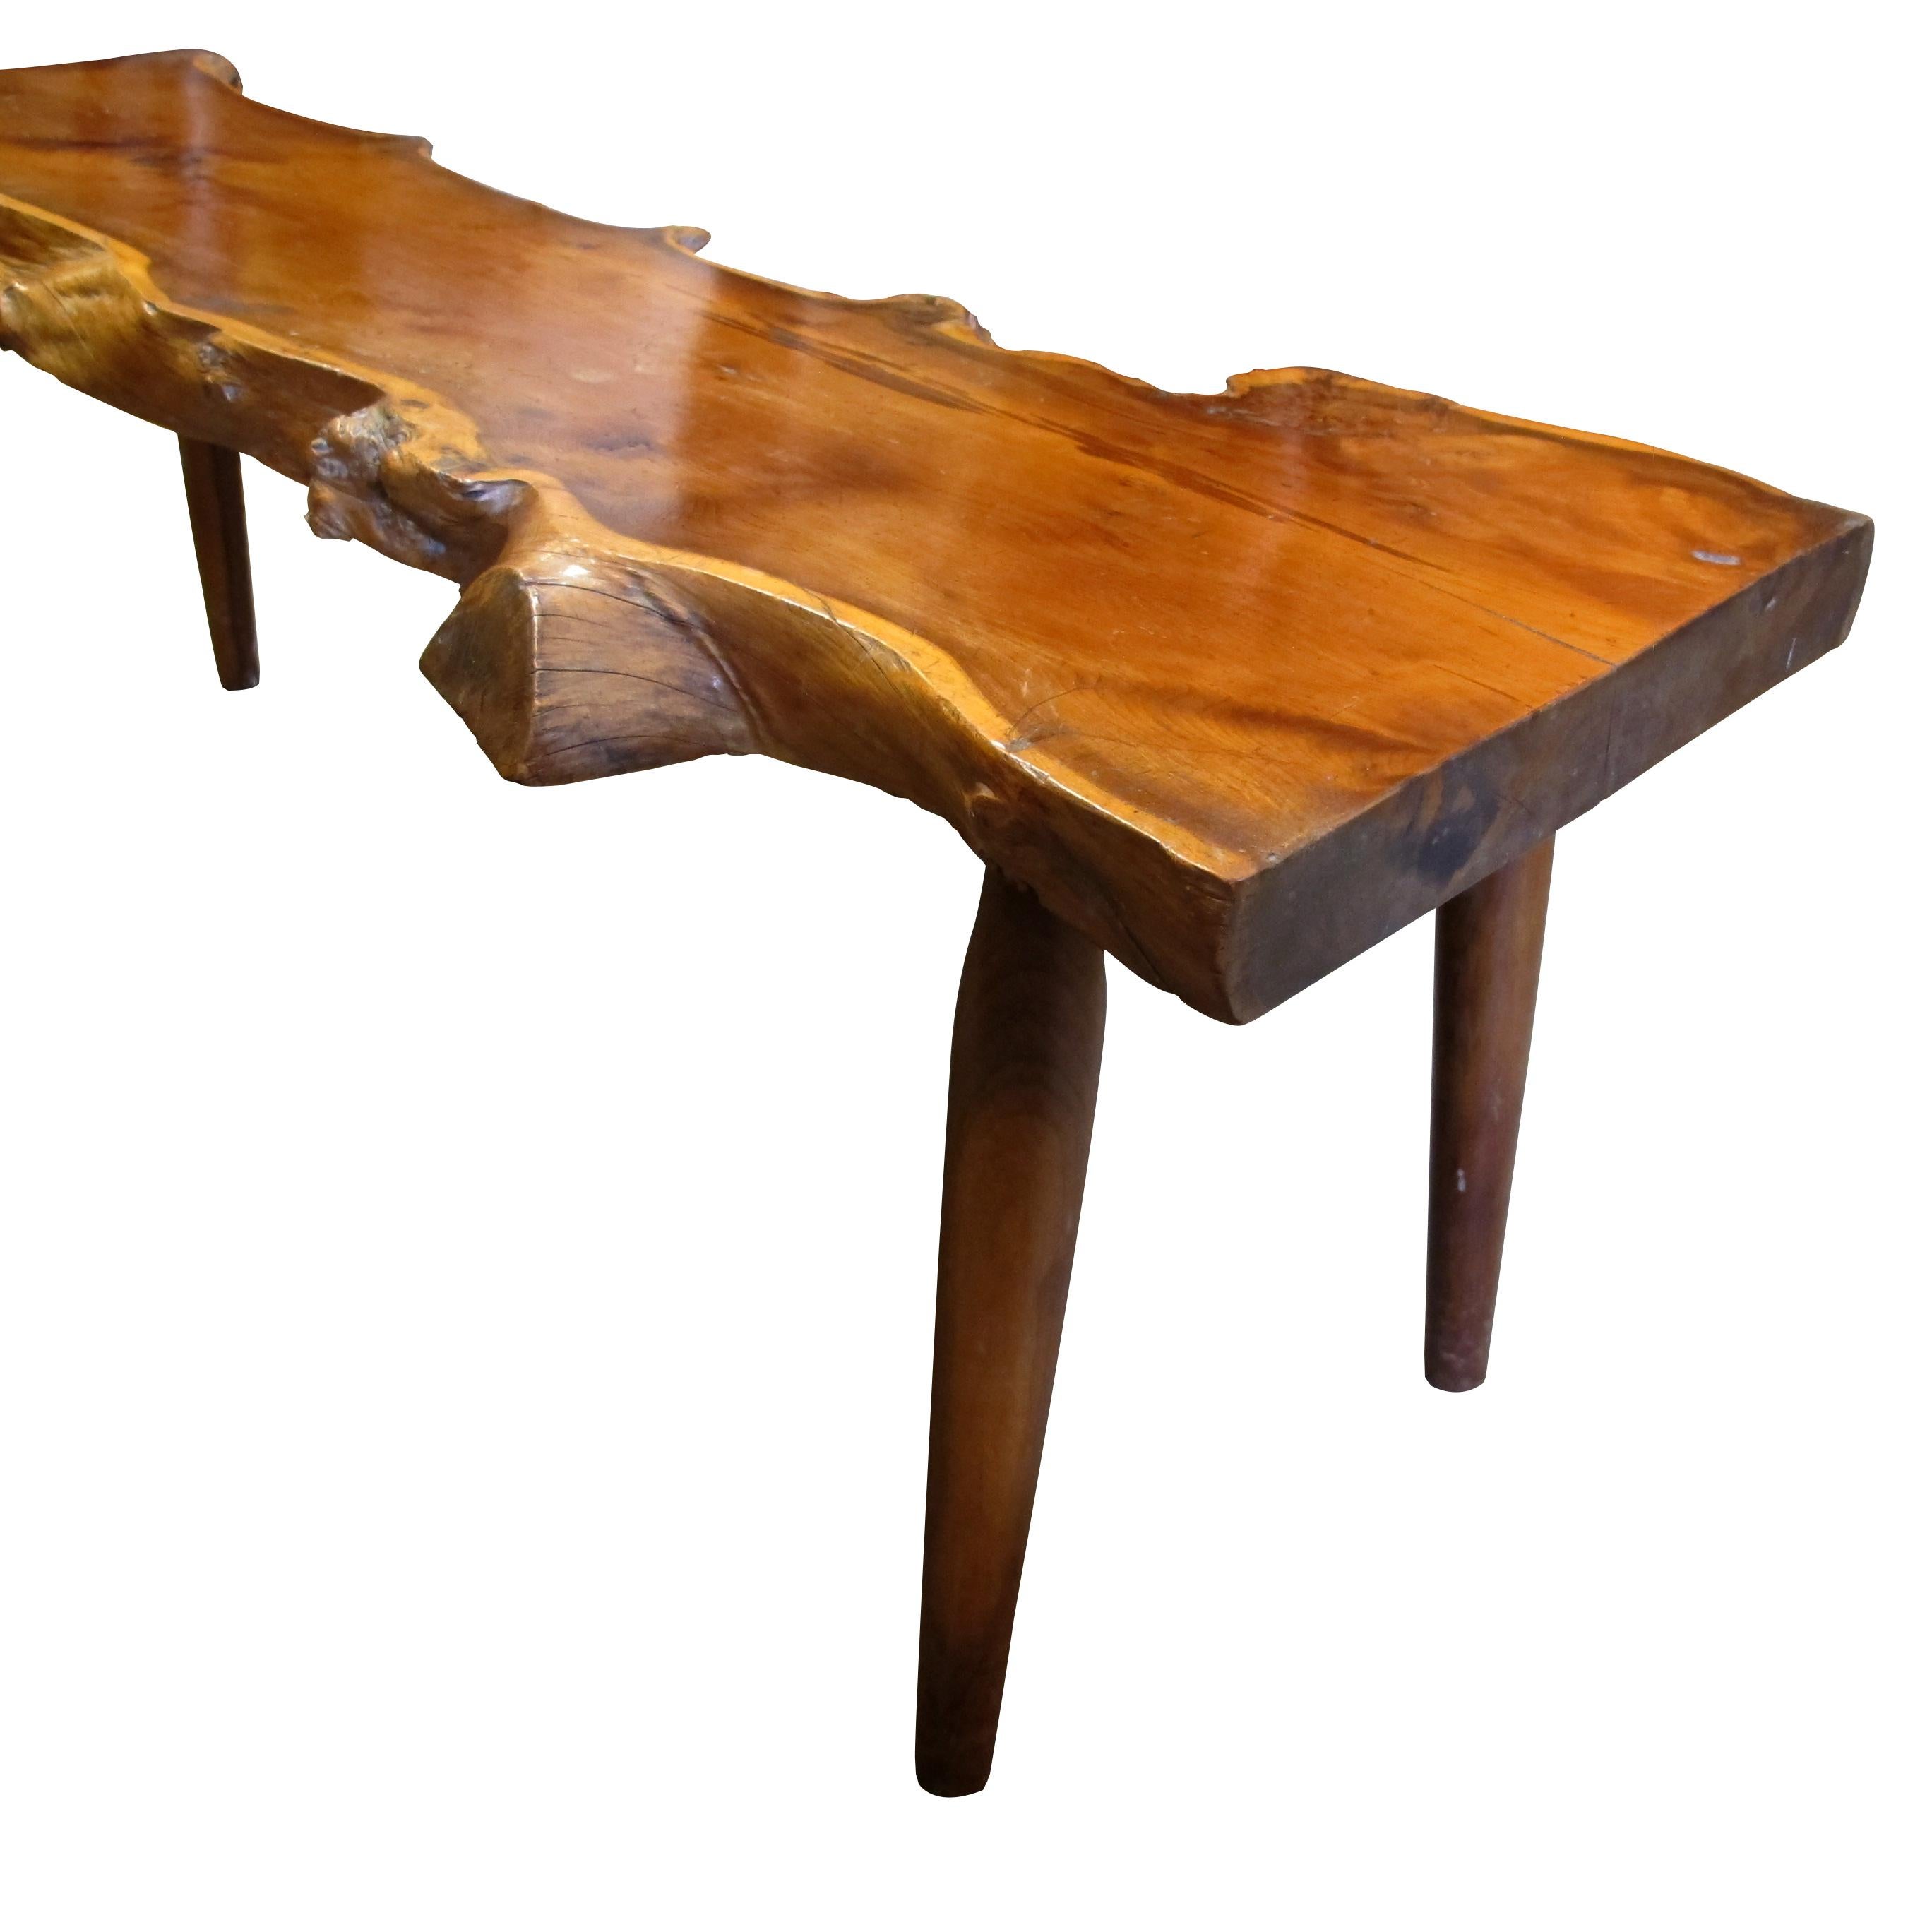 Mid-20th Century 1960s Live Edge Yew Wood Bench Attributed to Reynolds Of Ludlow, English For Sale